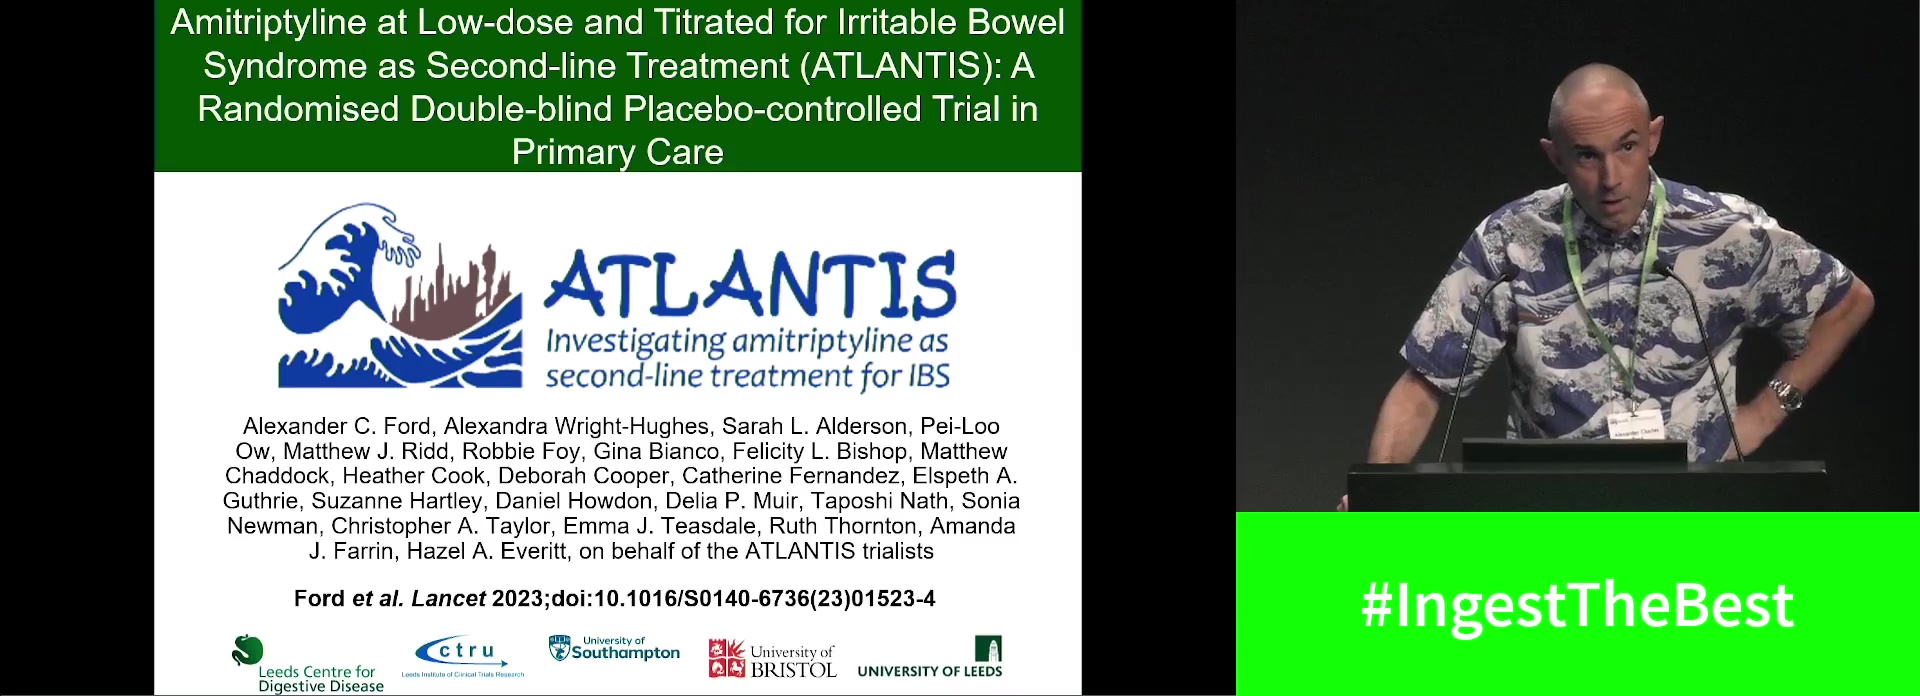 AMITRIPTYLINE AT LOW-DOSE AND TITRATED FOR IRRITABLE BOWEL SYNDROME AS SECOND-LINE TREATMENT (ATLANTIS): A RANDOMISED DOUBLE-BLIND PLACEBO-CONTROLLED TRIAL IN PRIMARY CARE